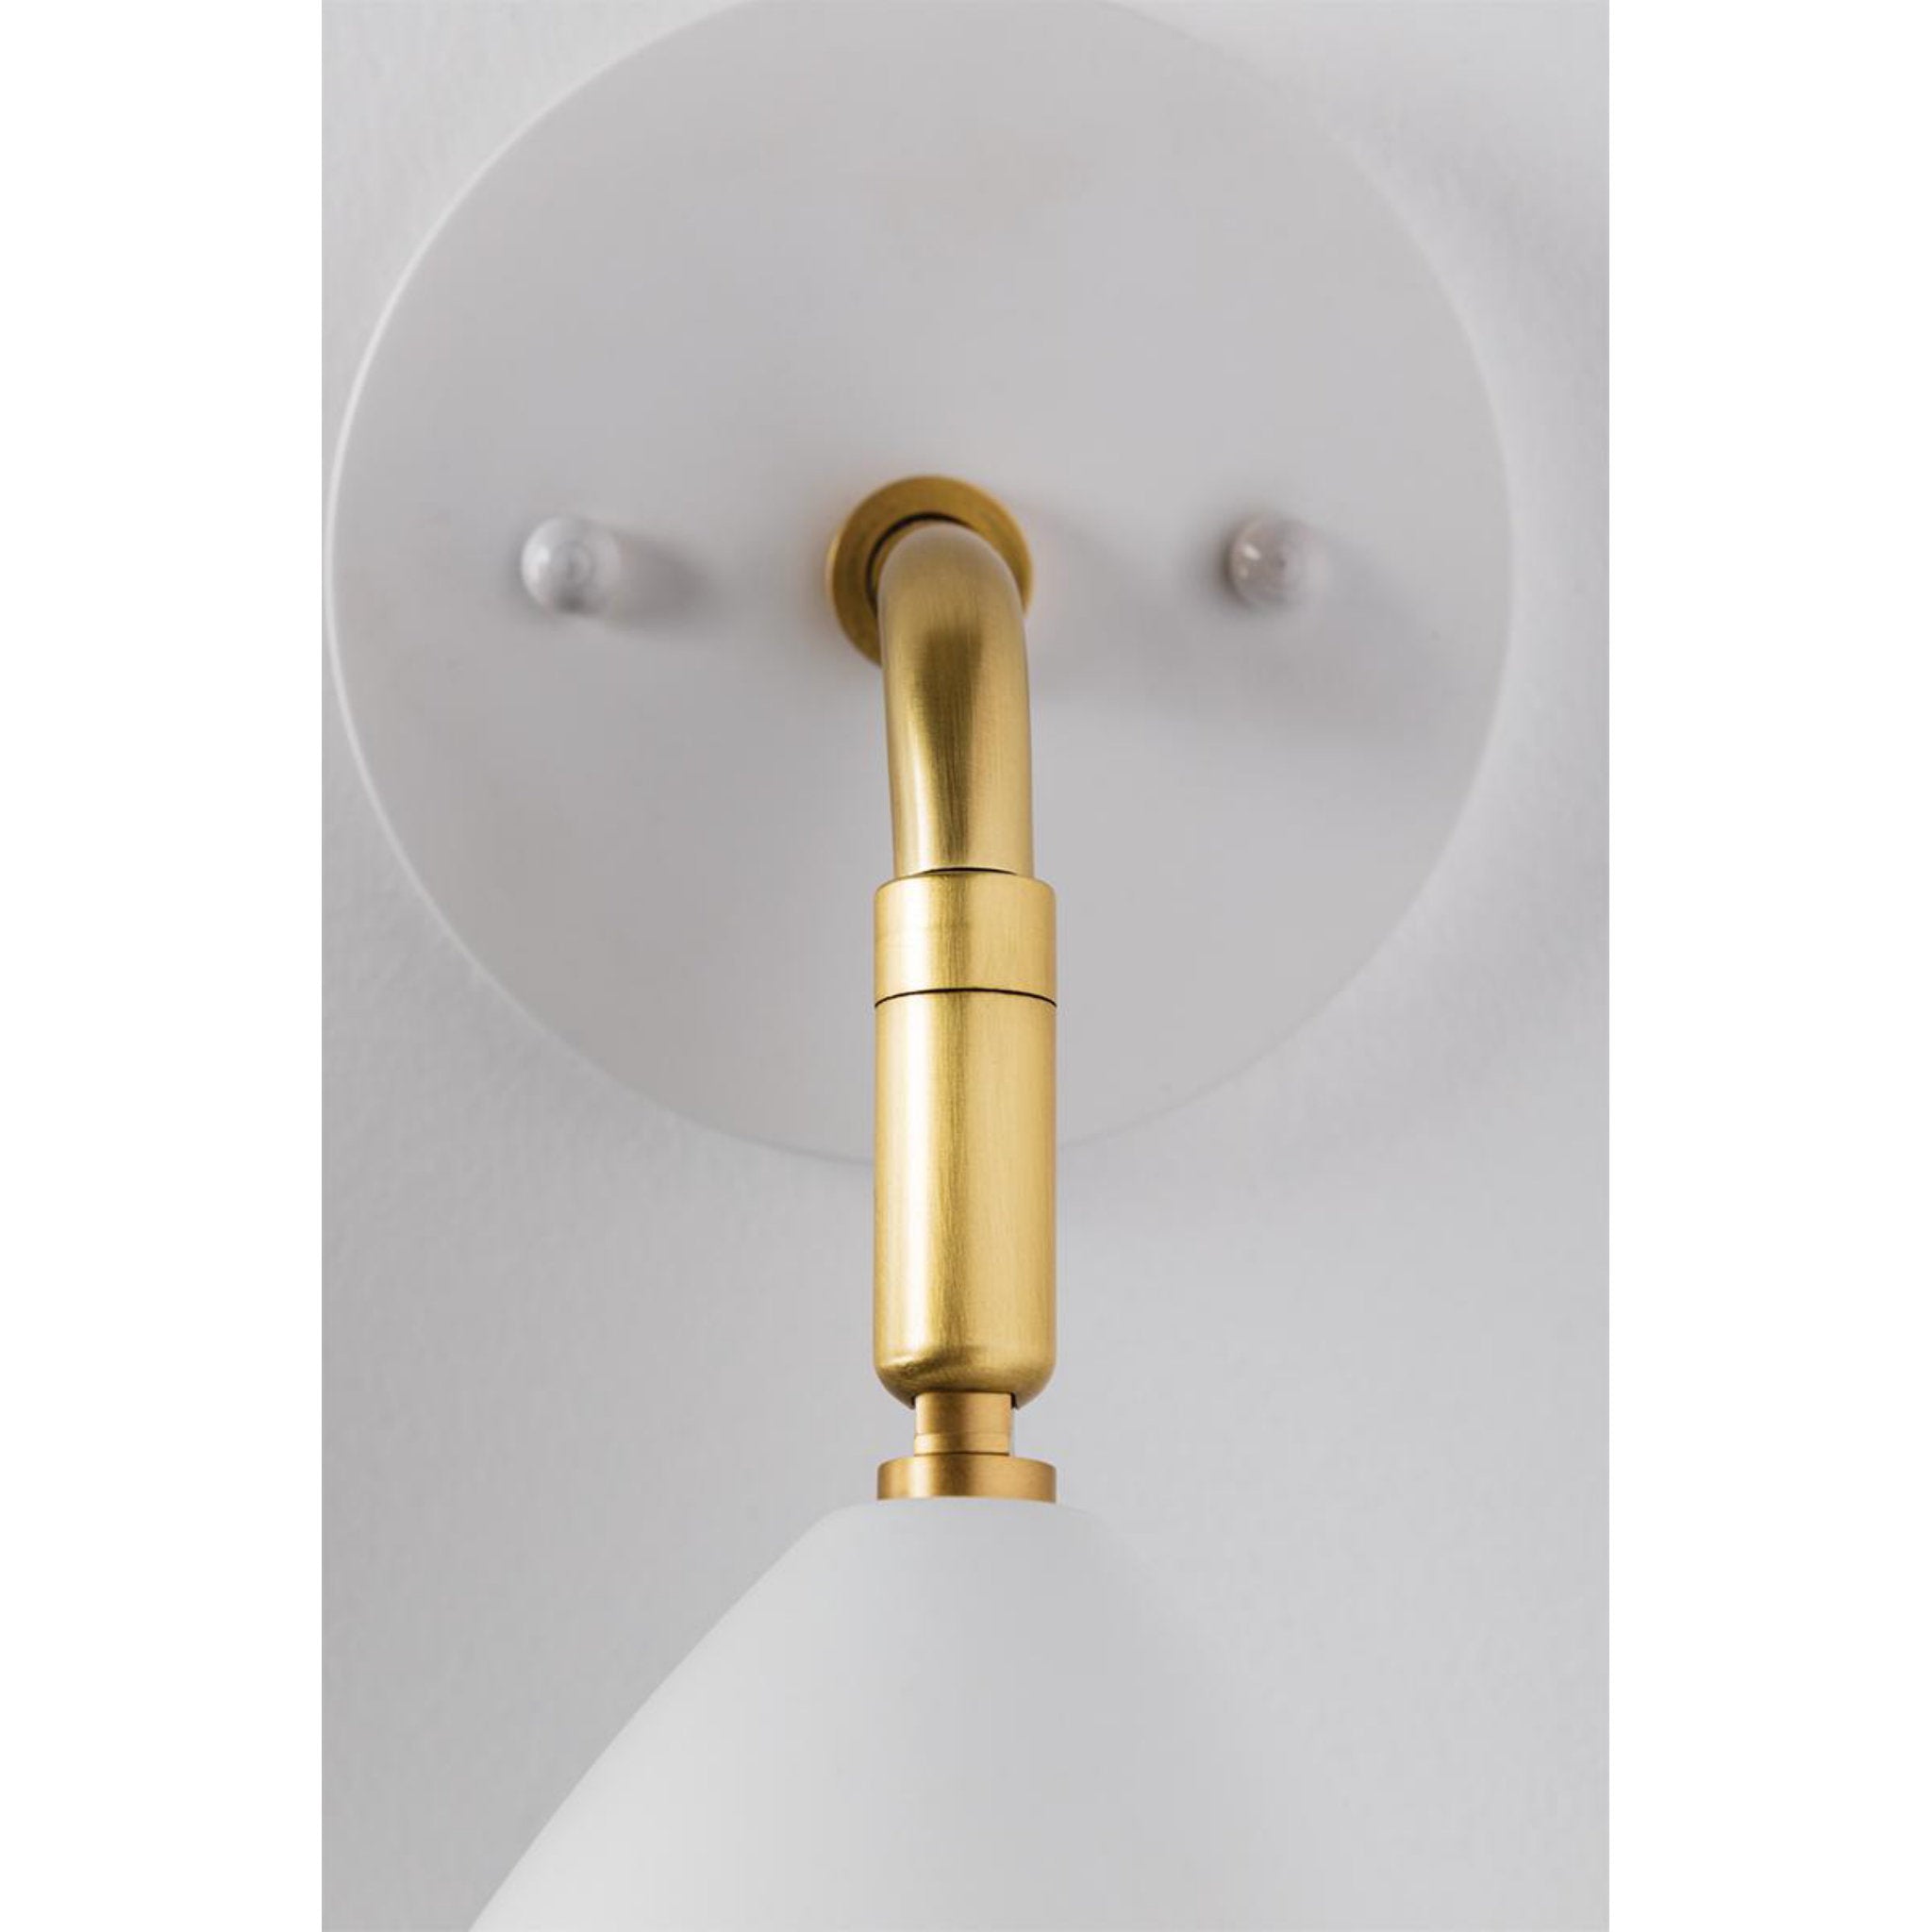 Gia 1-Light Wall Sconce in Aged Brass/Soft Off White